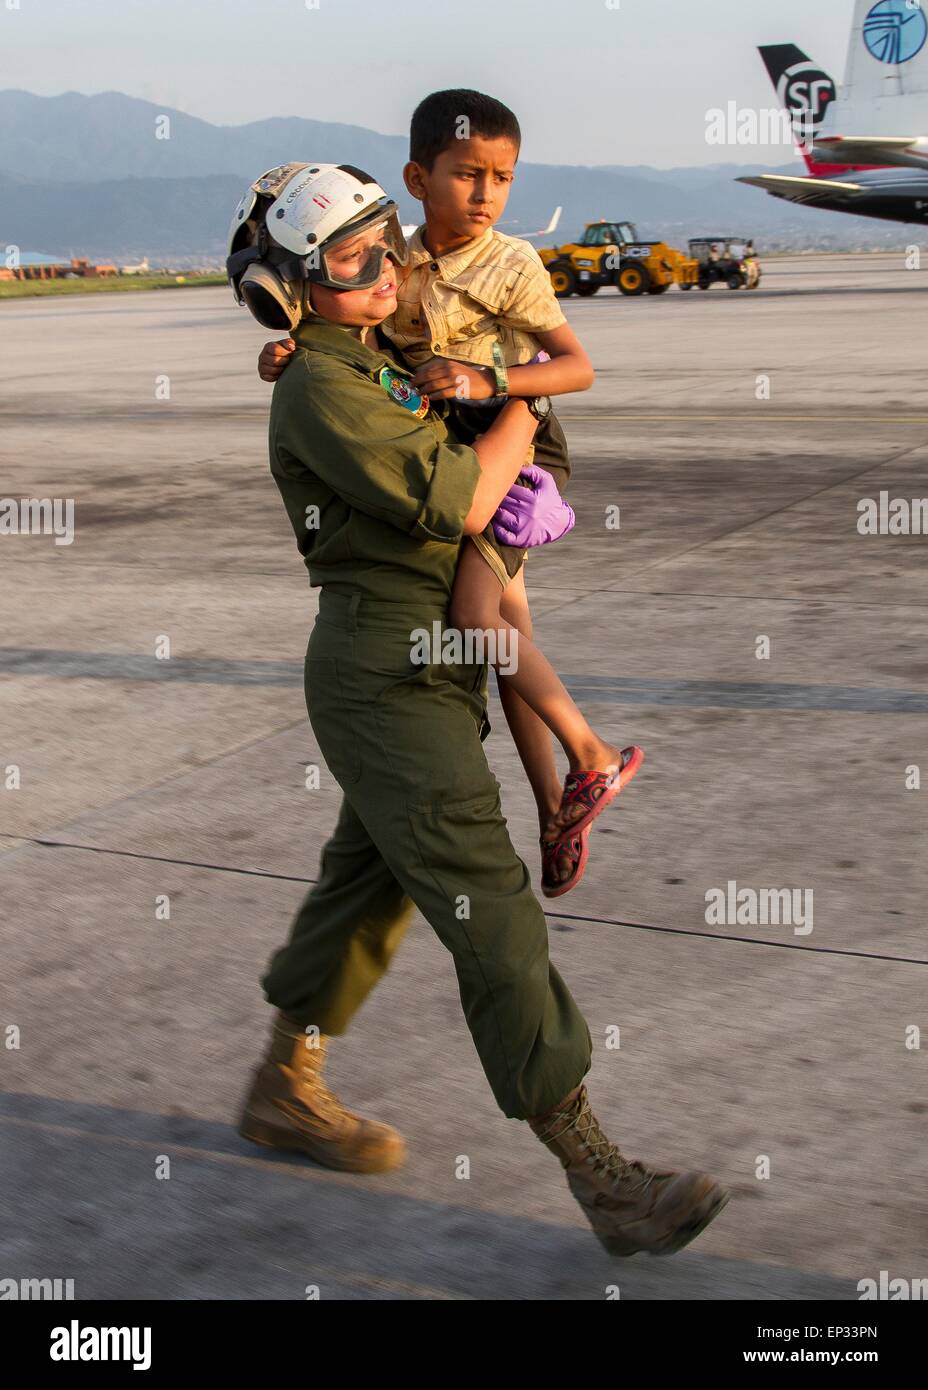 Kathmandu, Nepal. 13th May, 2015. U.S. Marine Sergeant  A. B. Manning from Joint Task Force 505 carries a young earthquake victim to a medical triage area at Tribhuvan International Airport May 12, 2015 in Kathmandu, Nepal. A 7.3 magnitude aftershock earthquake struck the kingdom following the 7.8 magnitude earthquake on April 25th. Stock Photo